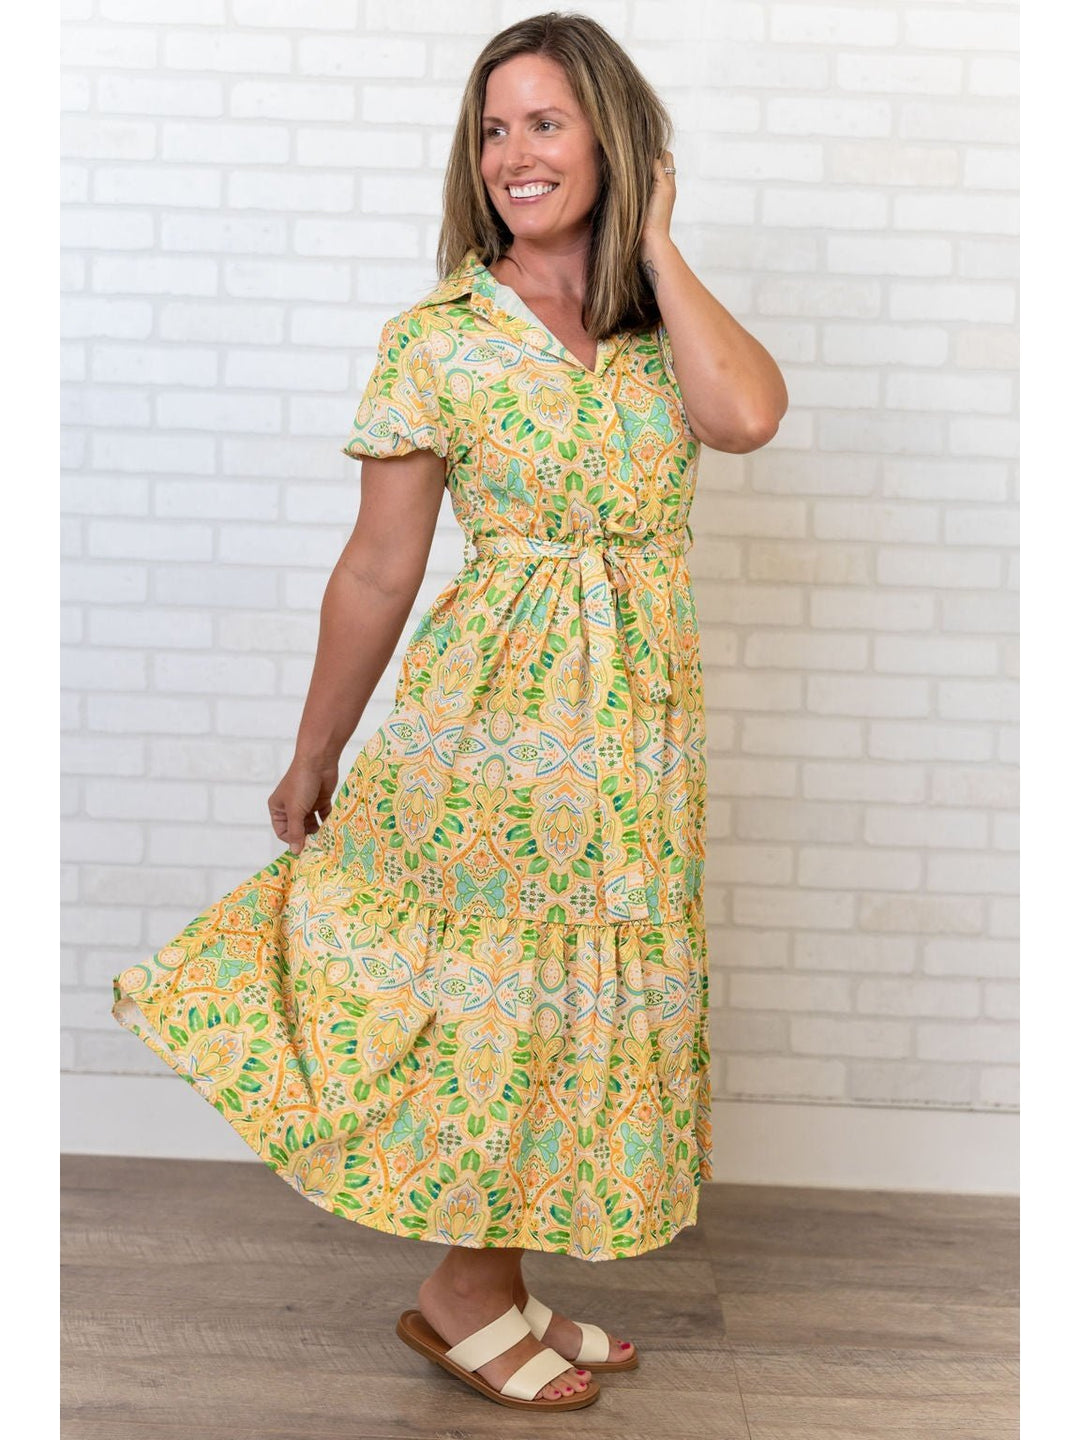 Green and Yellow Floral Print Short Sleeve Dress with Tie - Lolo Viv Boutique